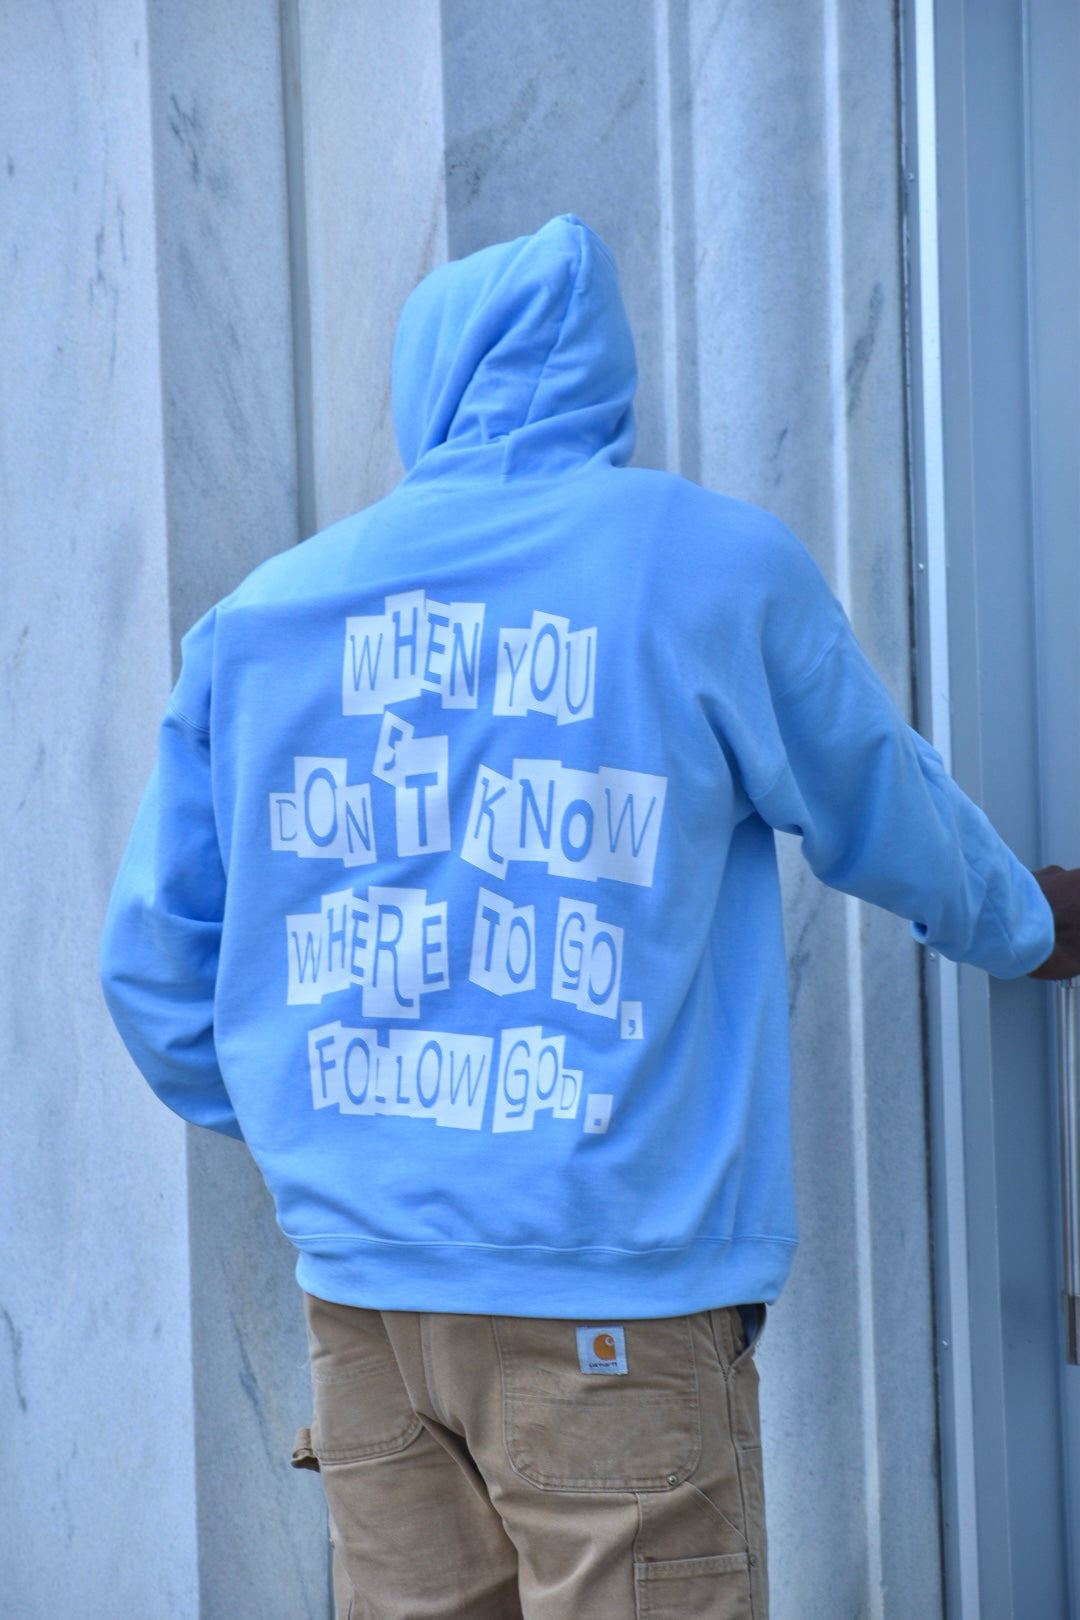 When You Don't Know Where To Go Follow God Light Blue Hoodie